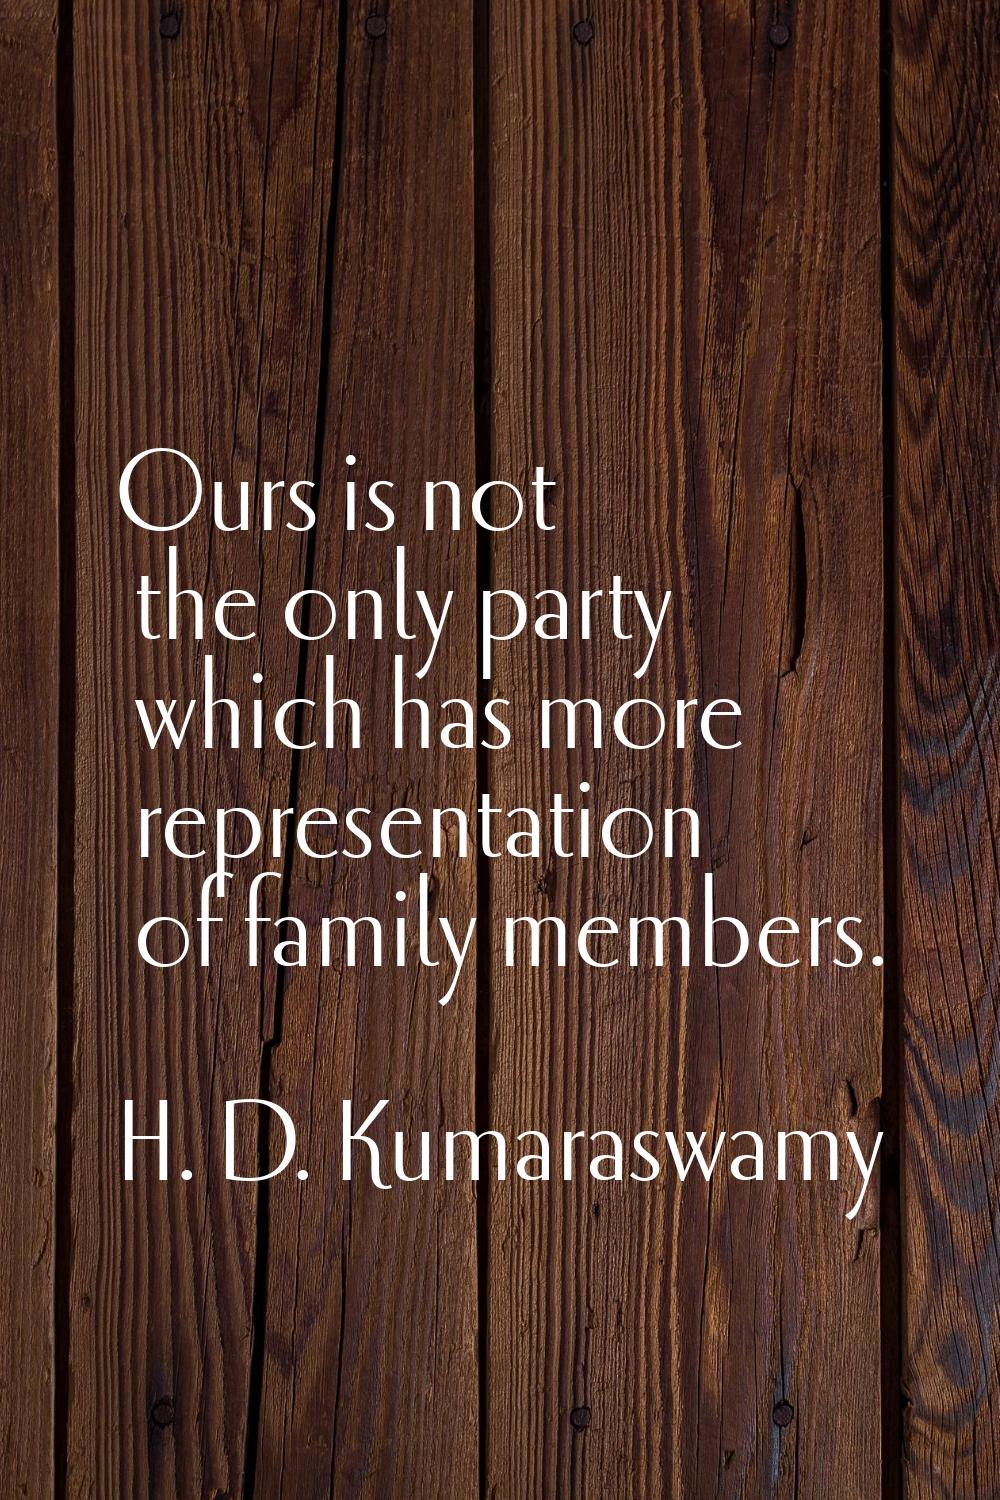 Ours is not the only party which has more representation of family members.